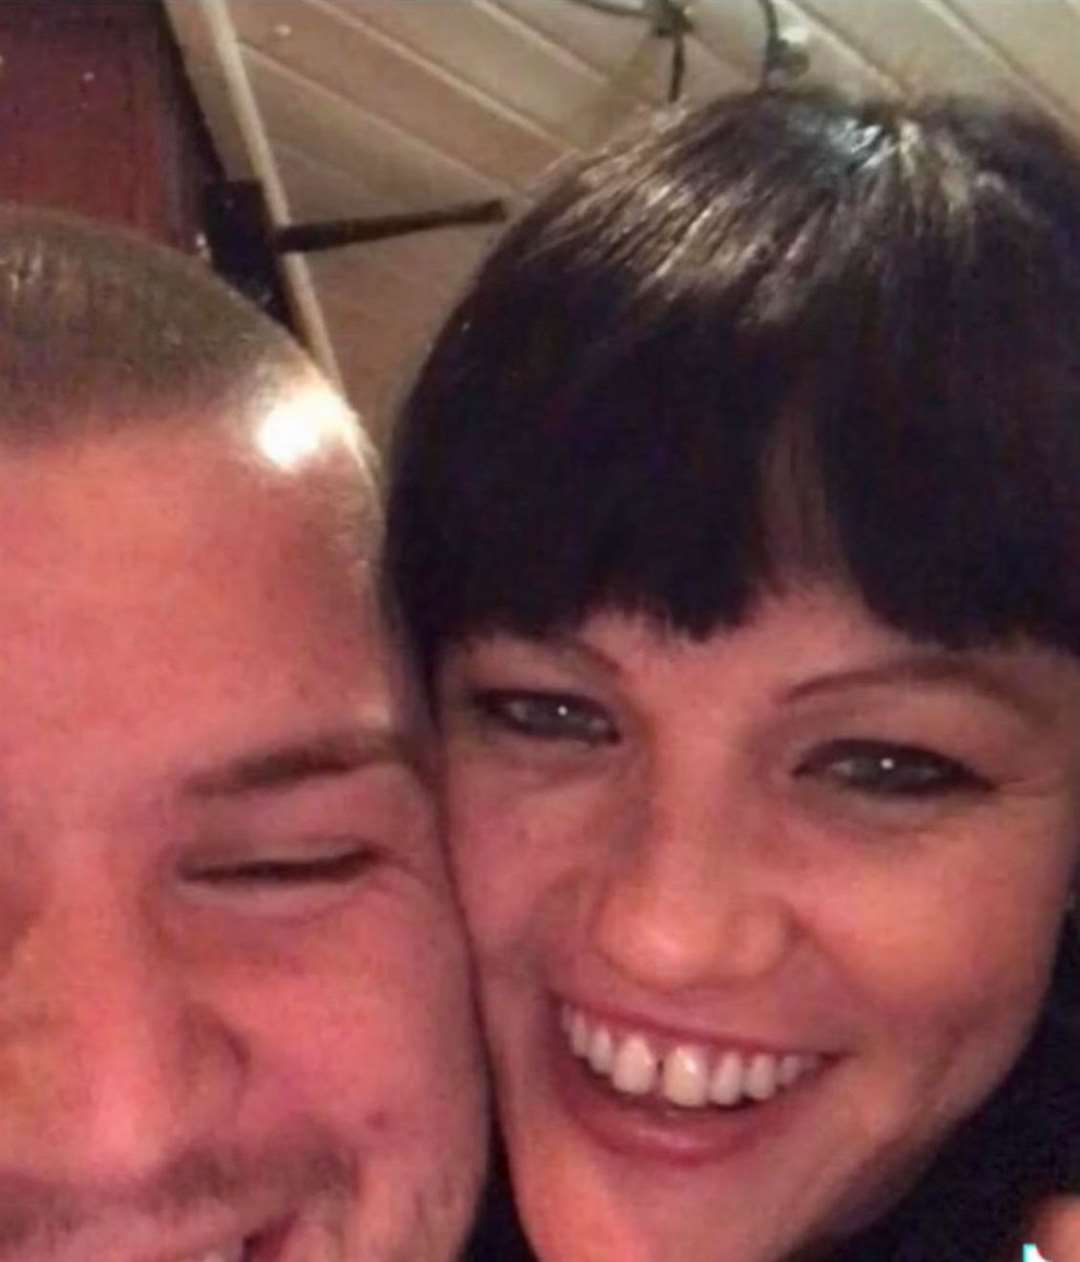 Joshua Whitehead died five months after his fiancee Victoria Lawson